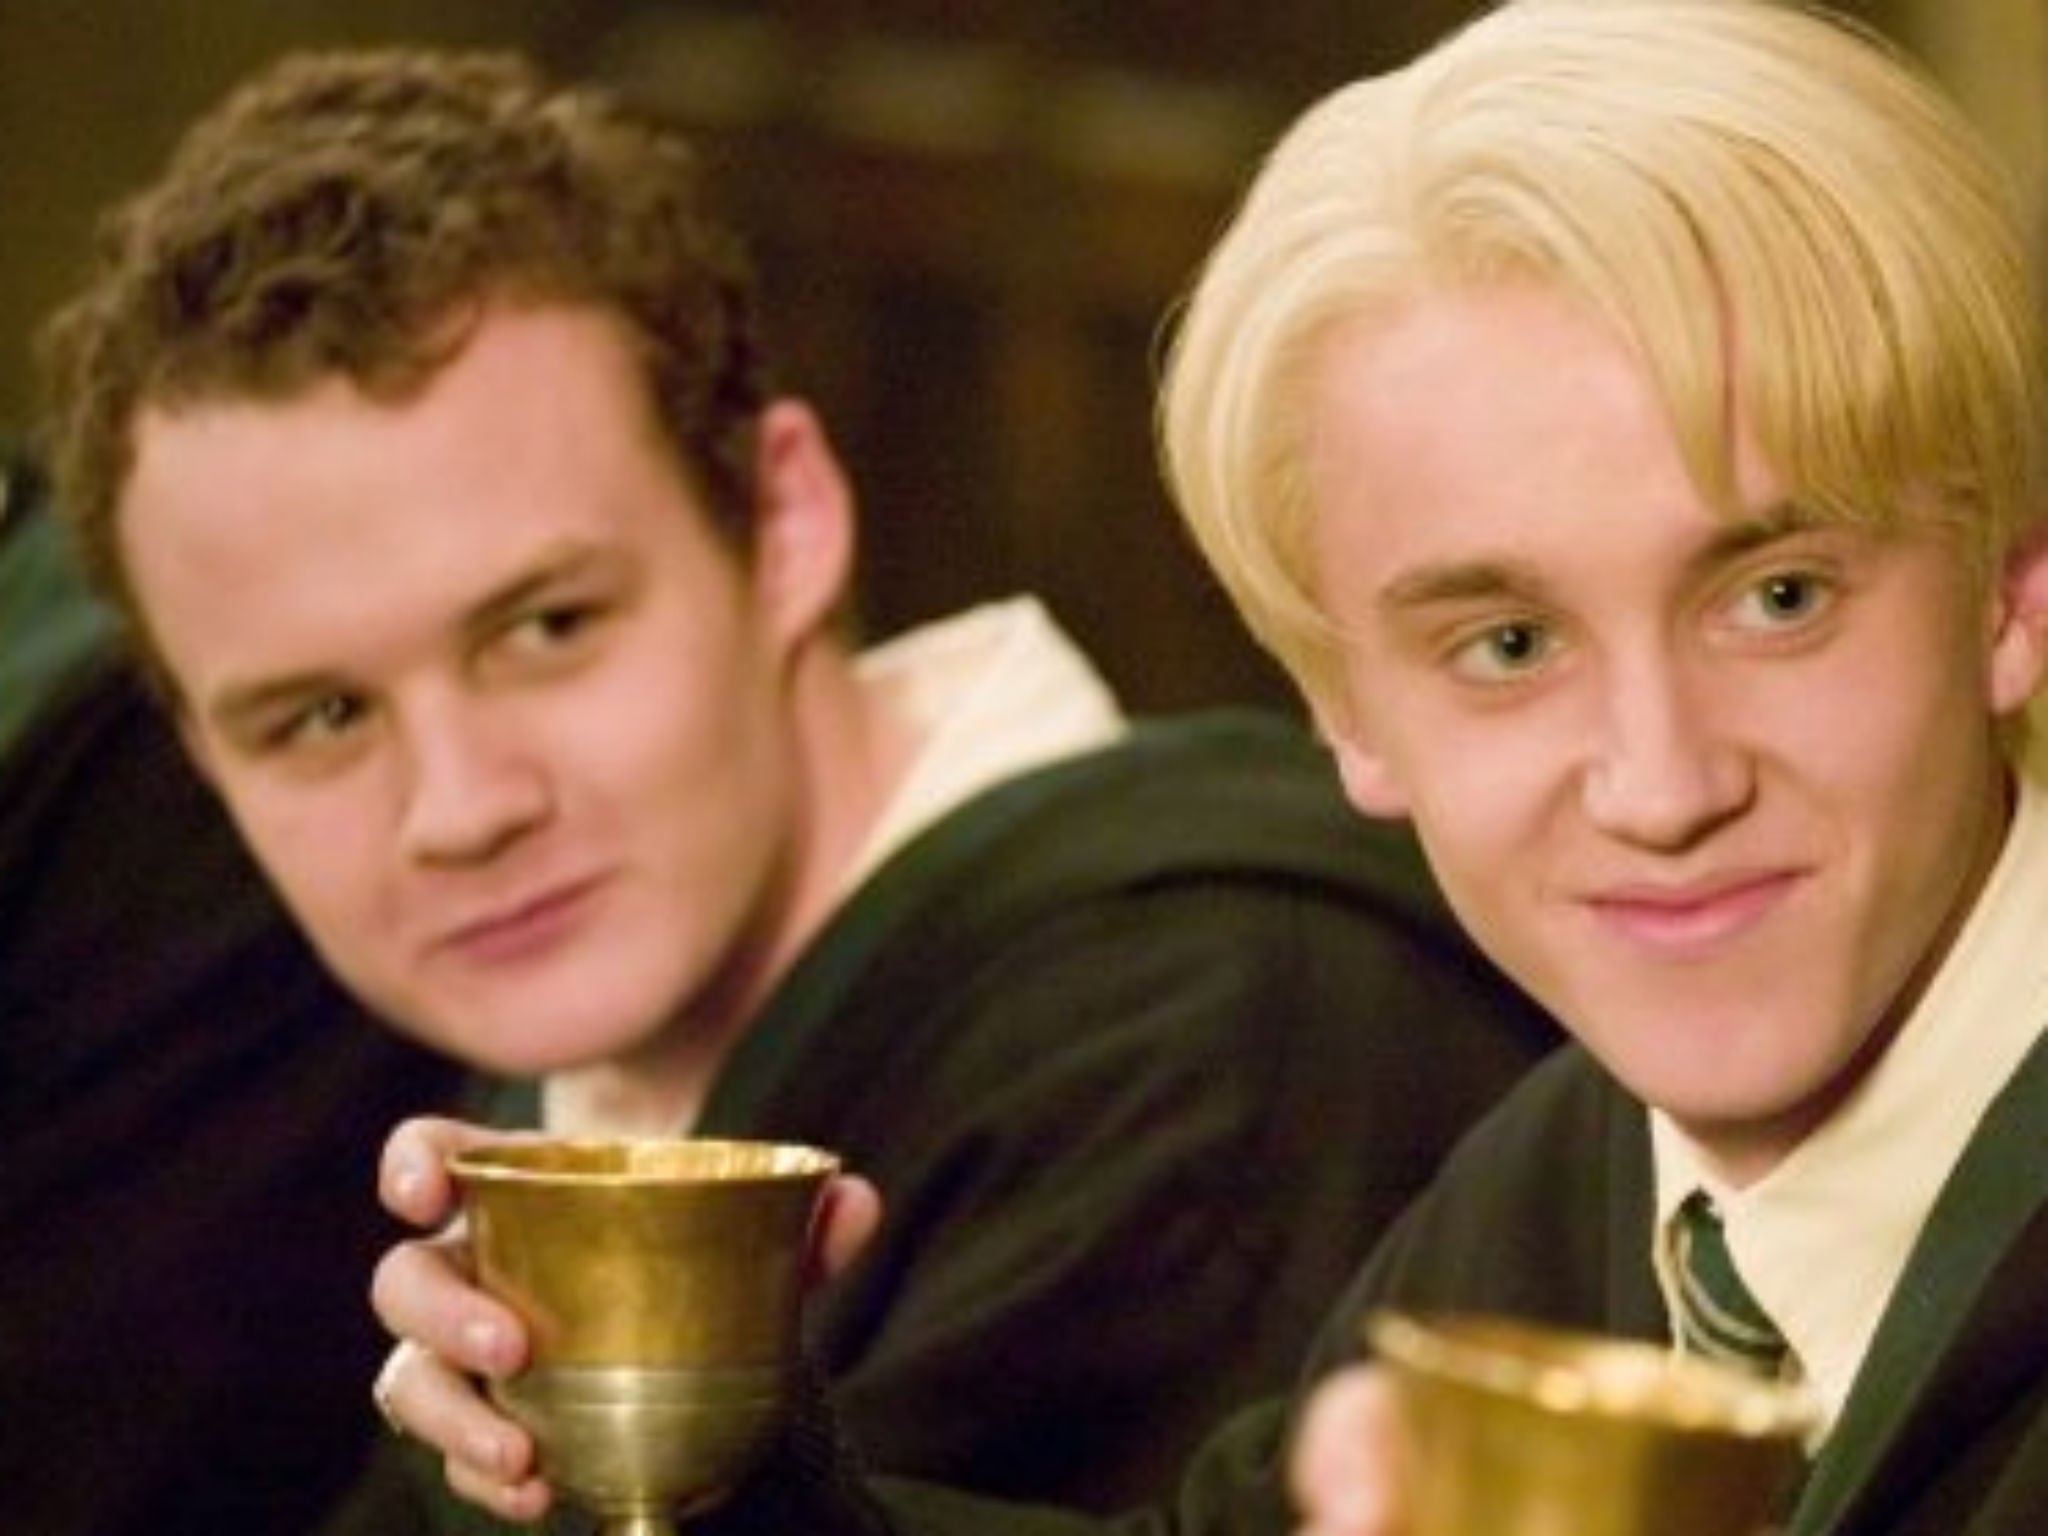 Gregory Goyle and Draco Malfoy in the Goblet of Fire